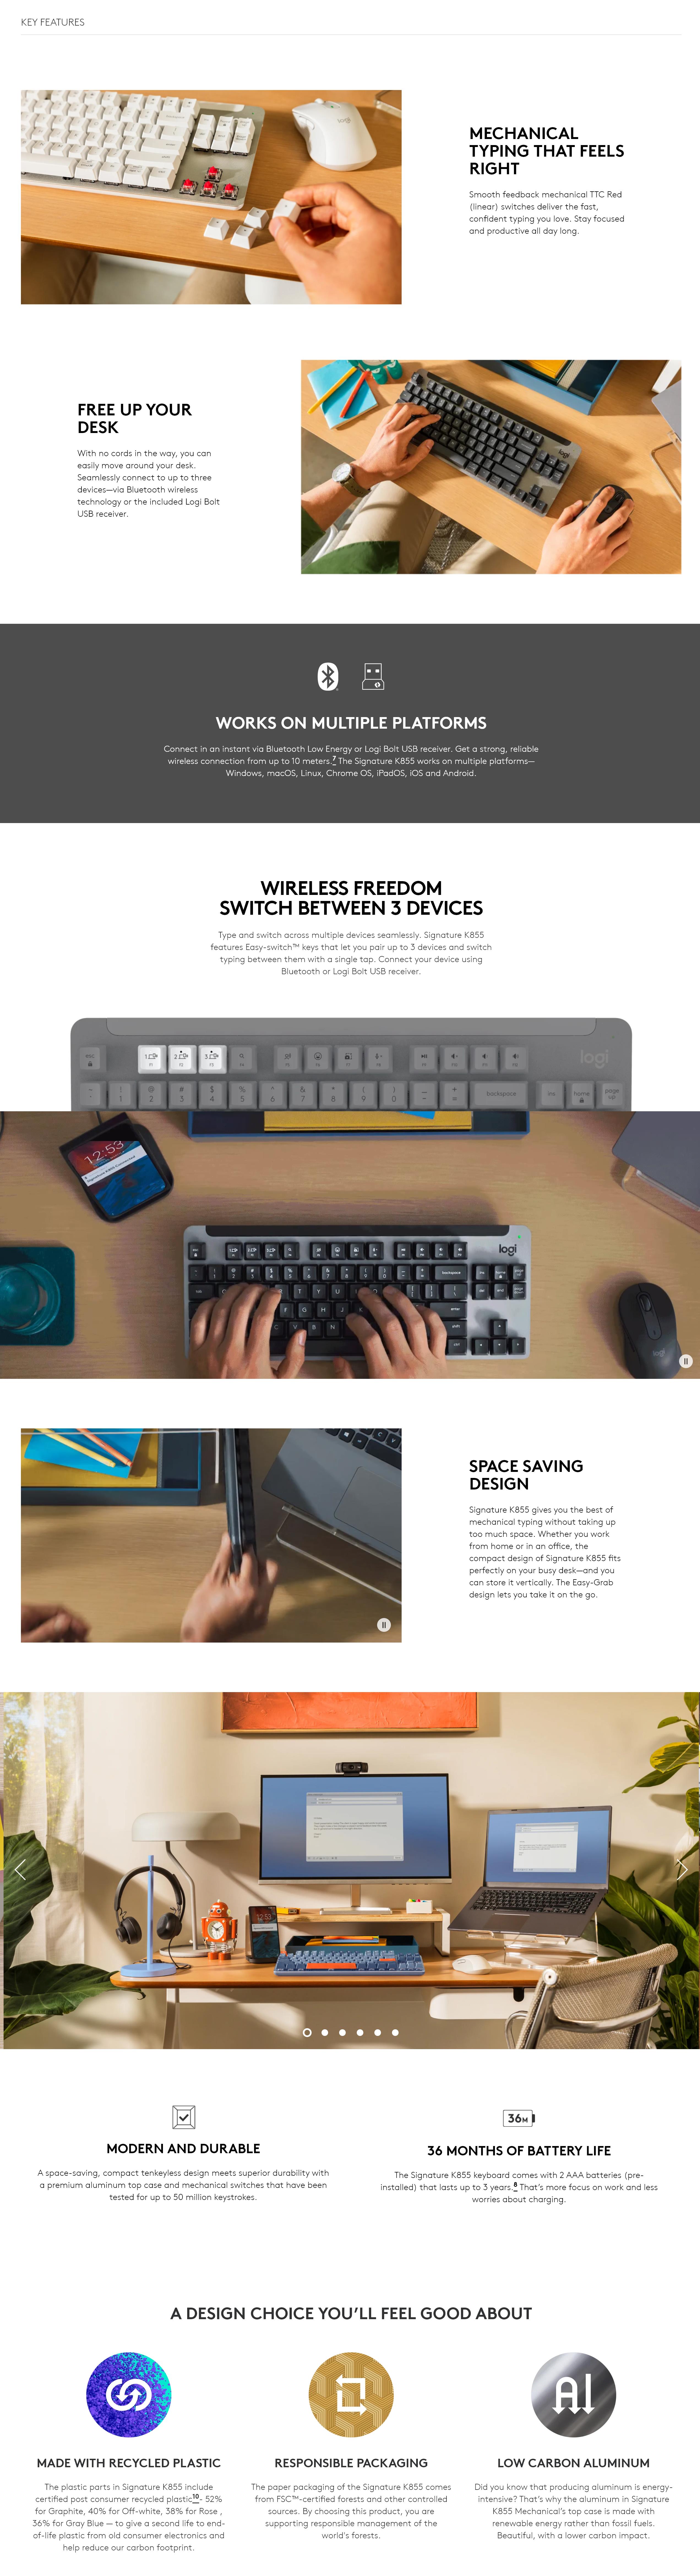 A large marketing image providing additional information about the product Logitech K855 Mechanical Keyboard - Graphite - Additional alt info not provided